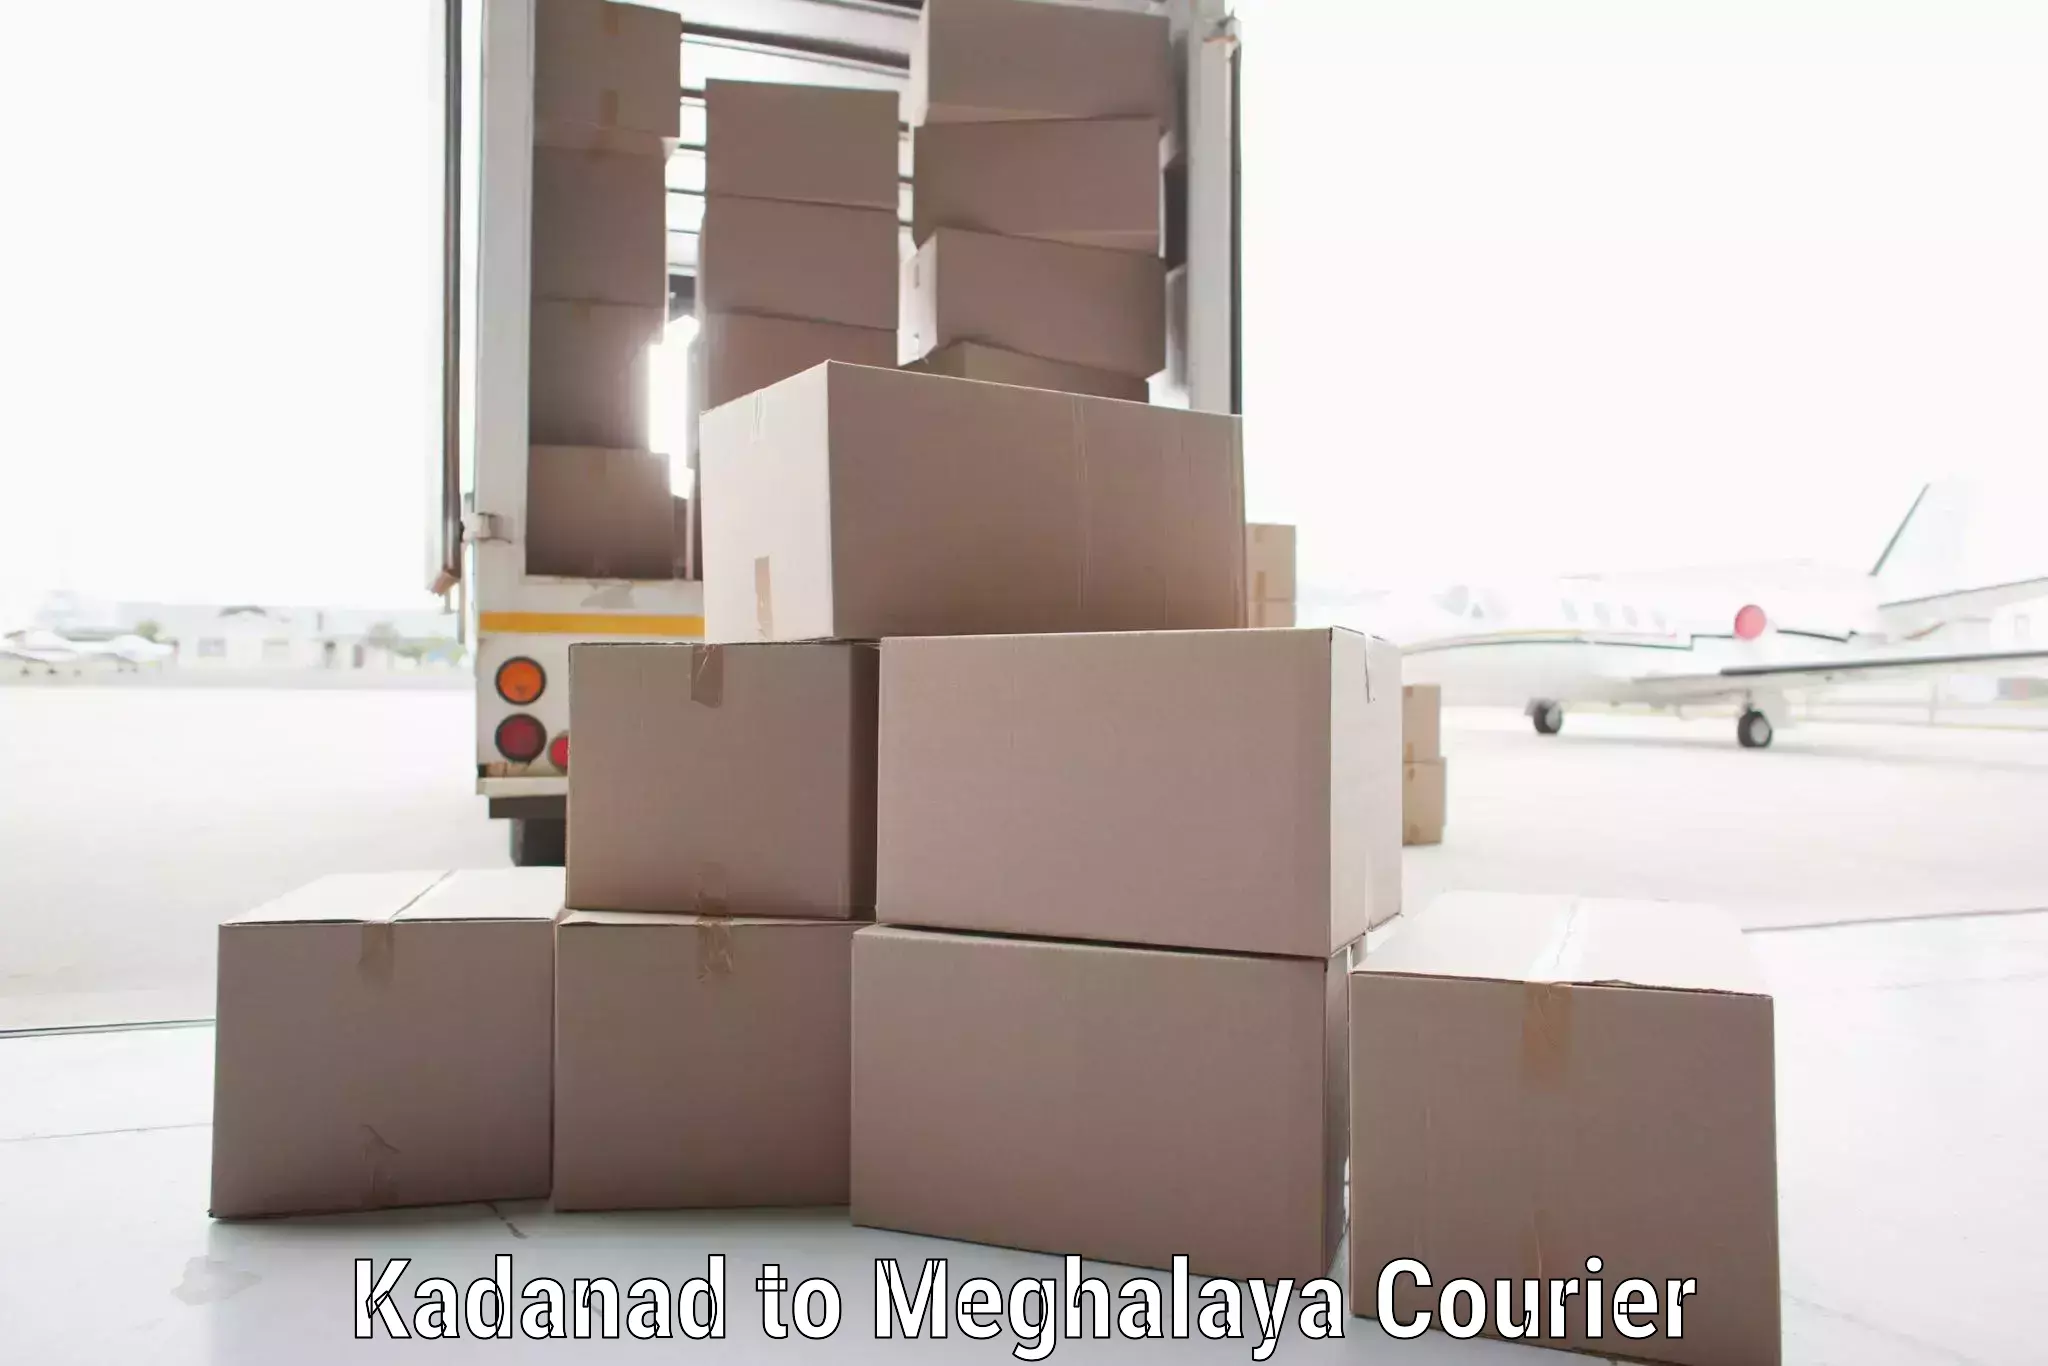 Global courier networks Kadanad to Shillong